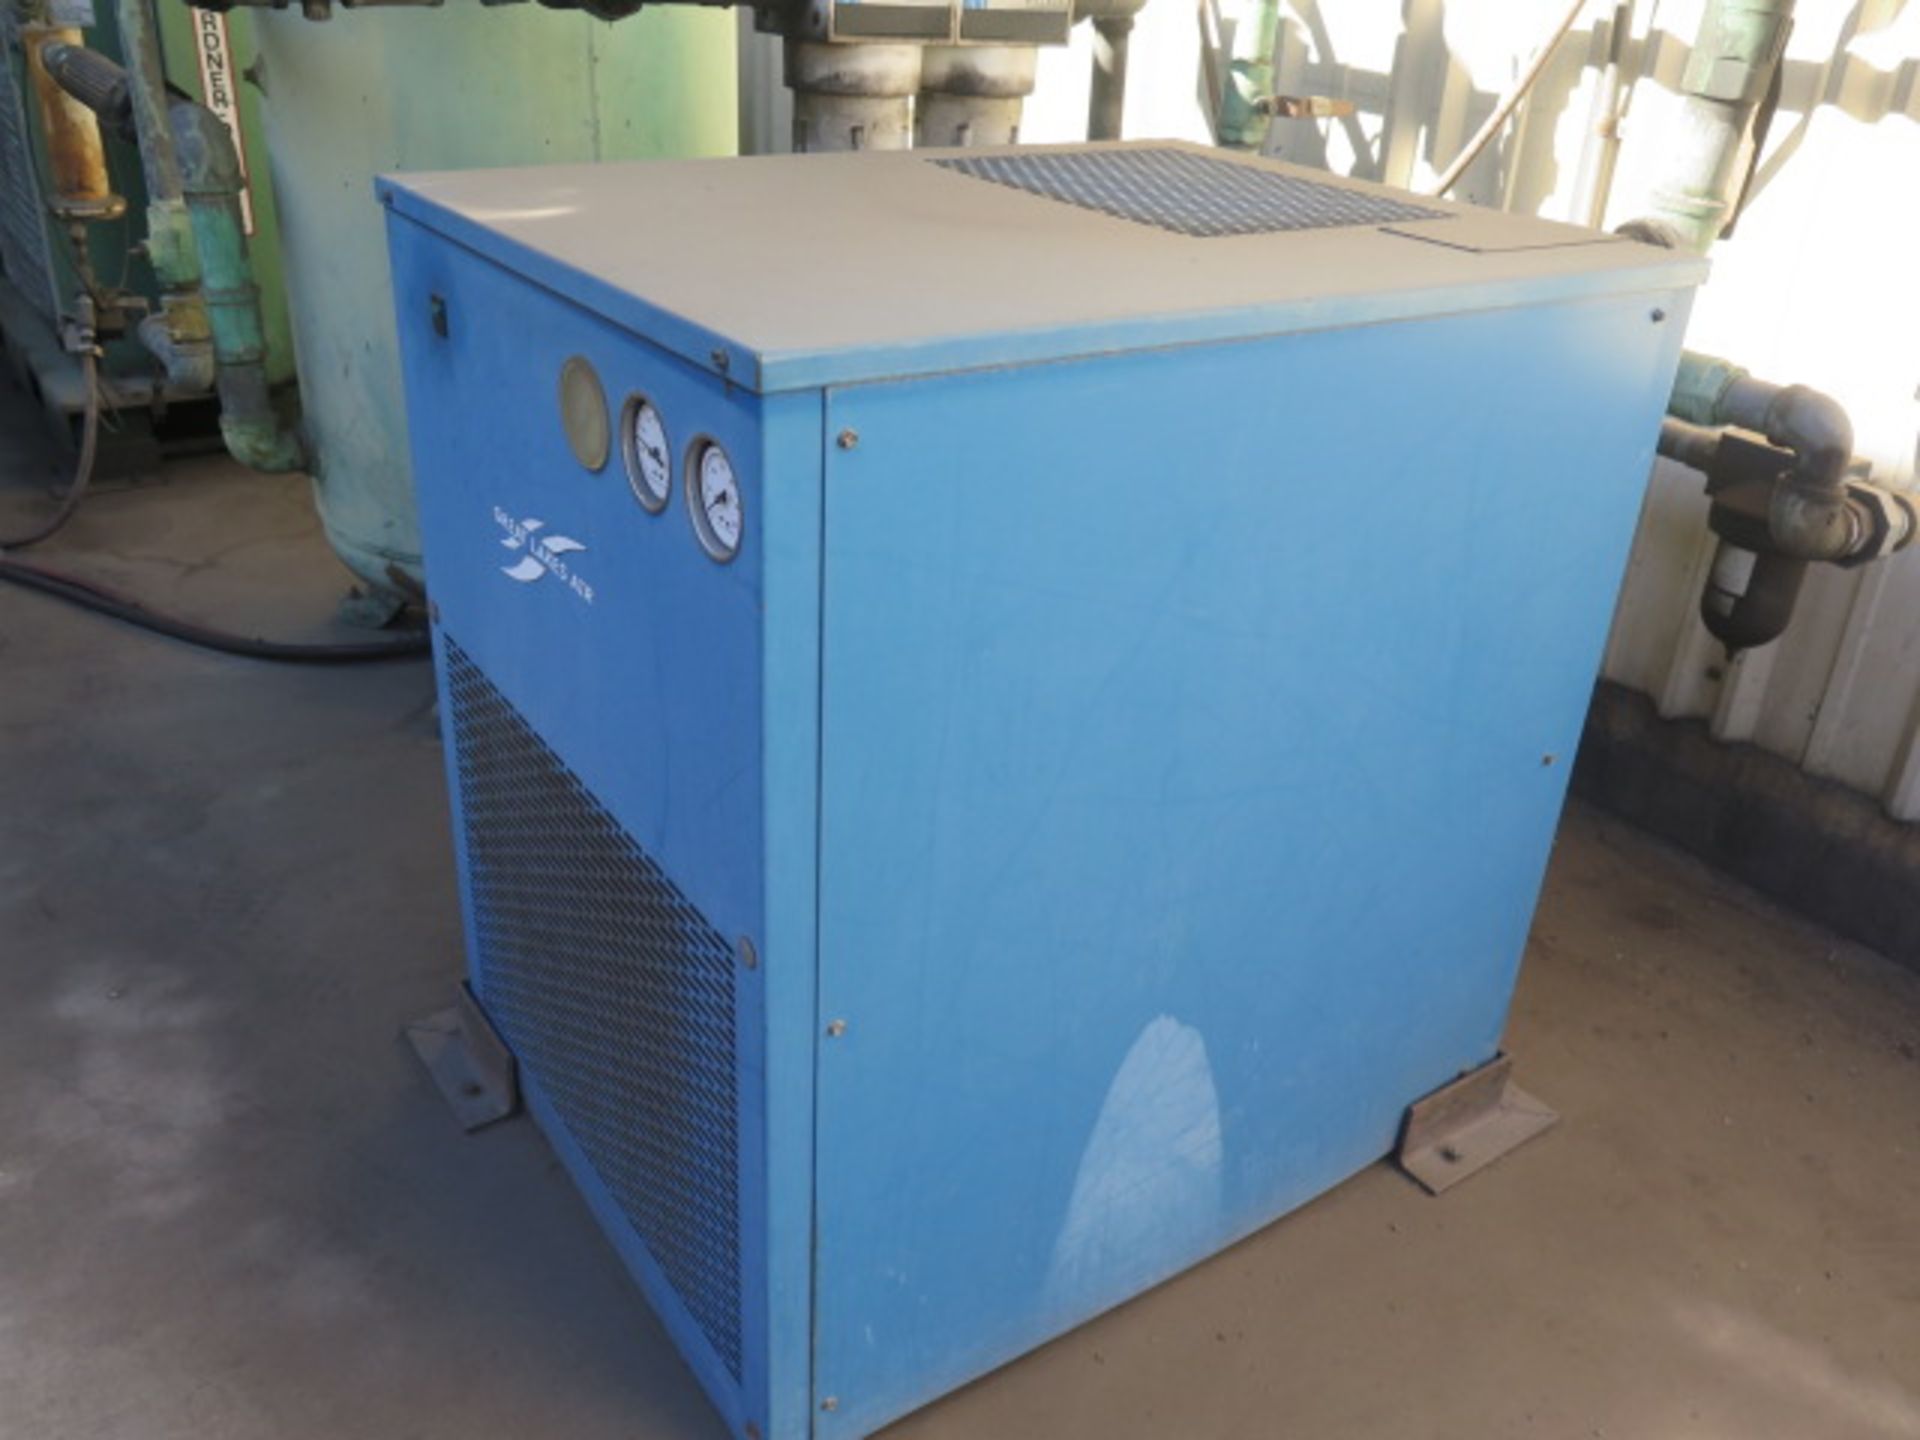 Gardner Denver "Electra-Screw" Rotary Air Compressor w/ Great Lakes Refrigerated Air Dryer and Air - Image 11 of 13